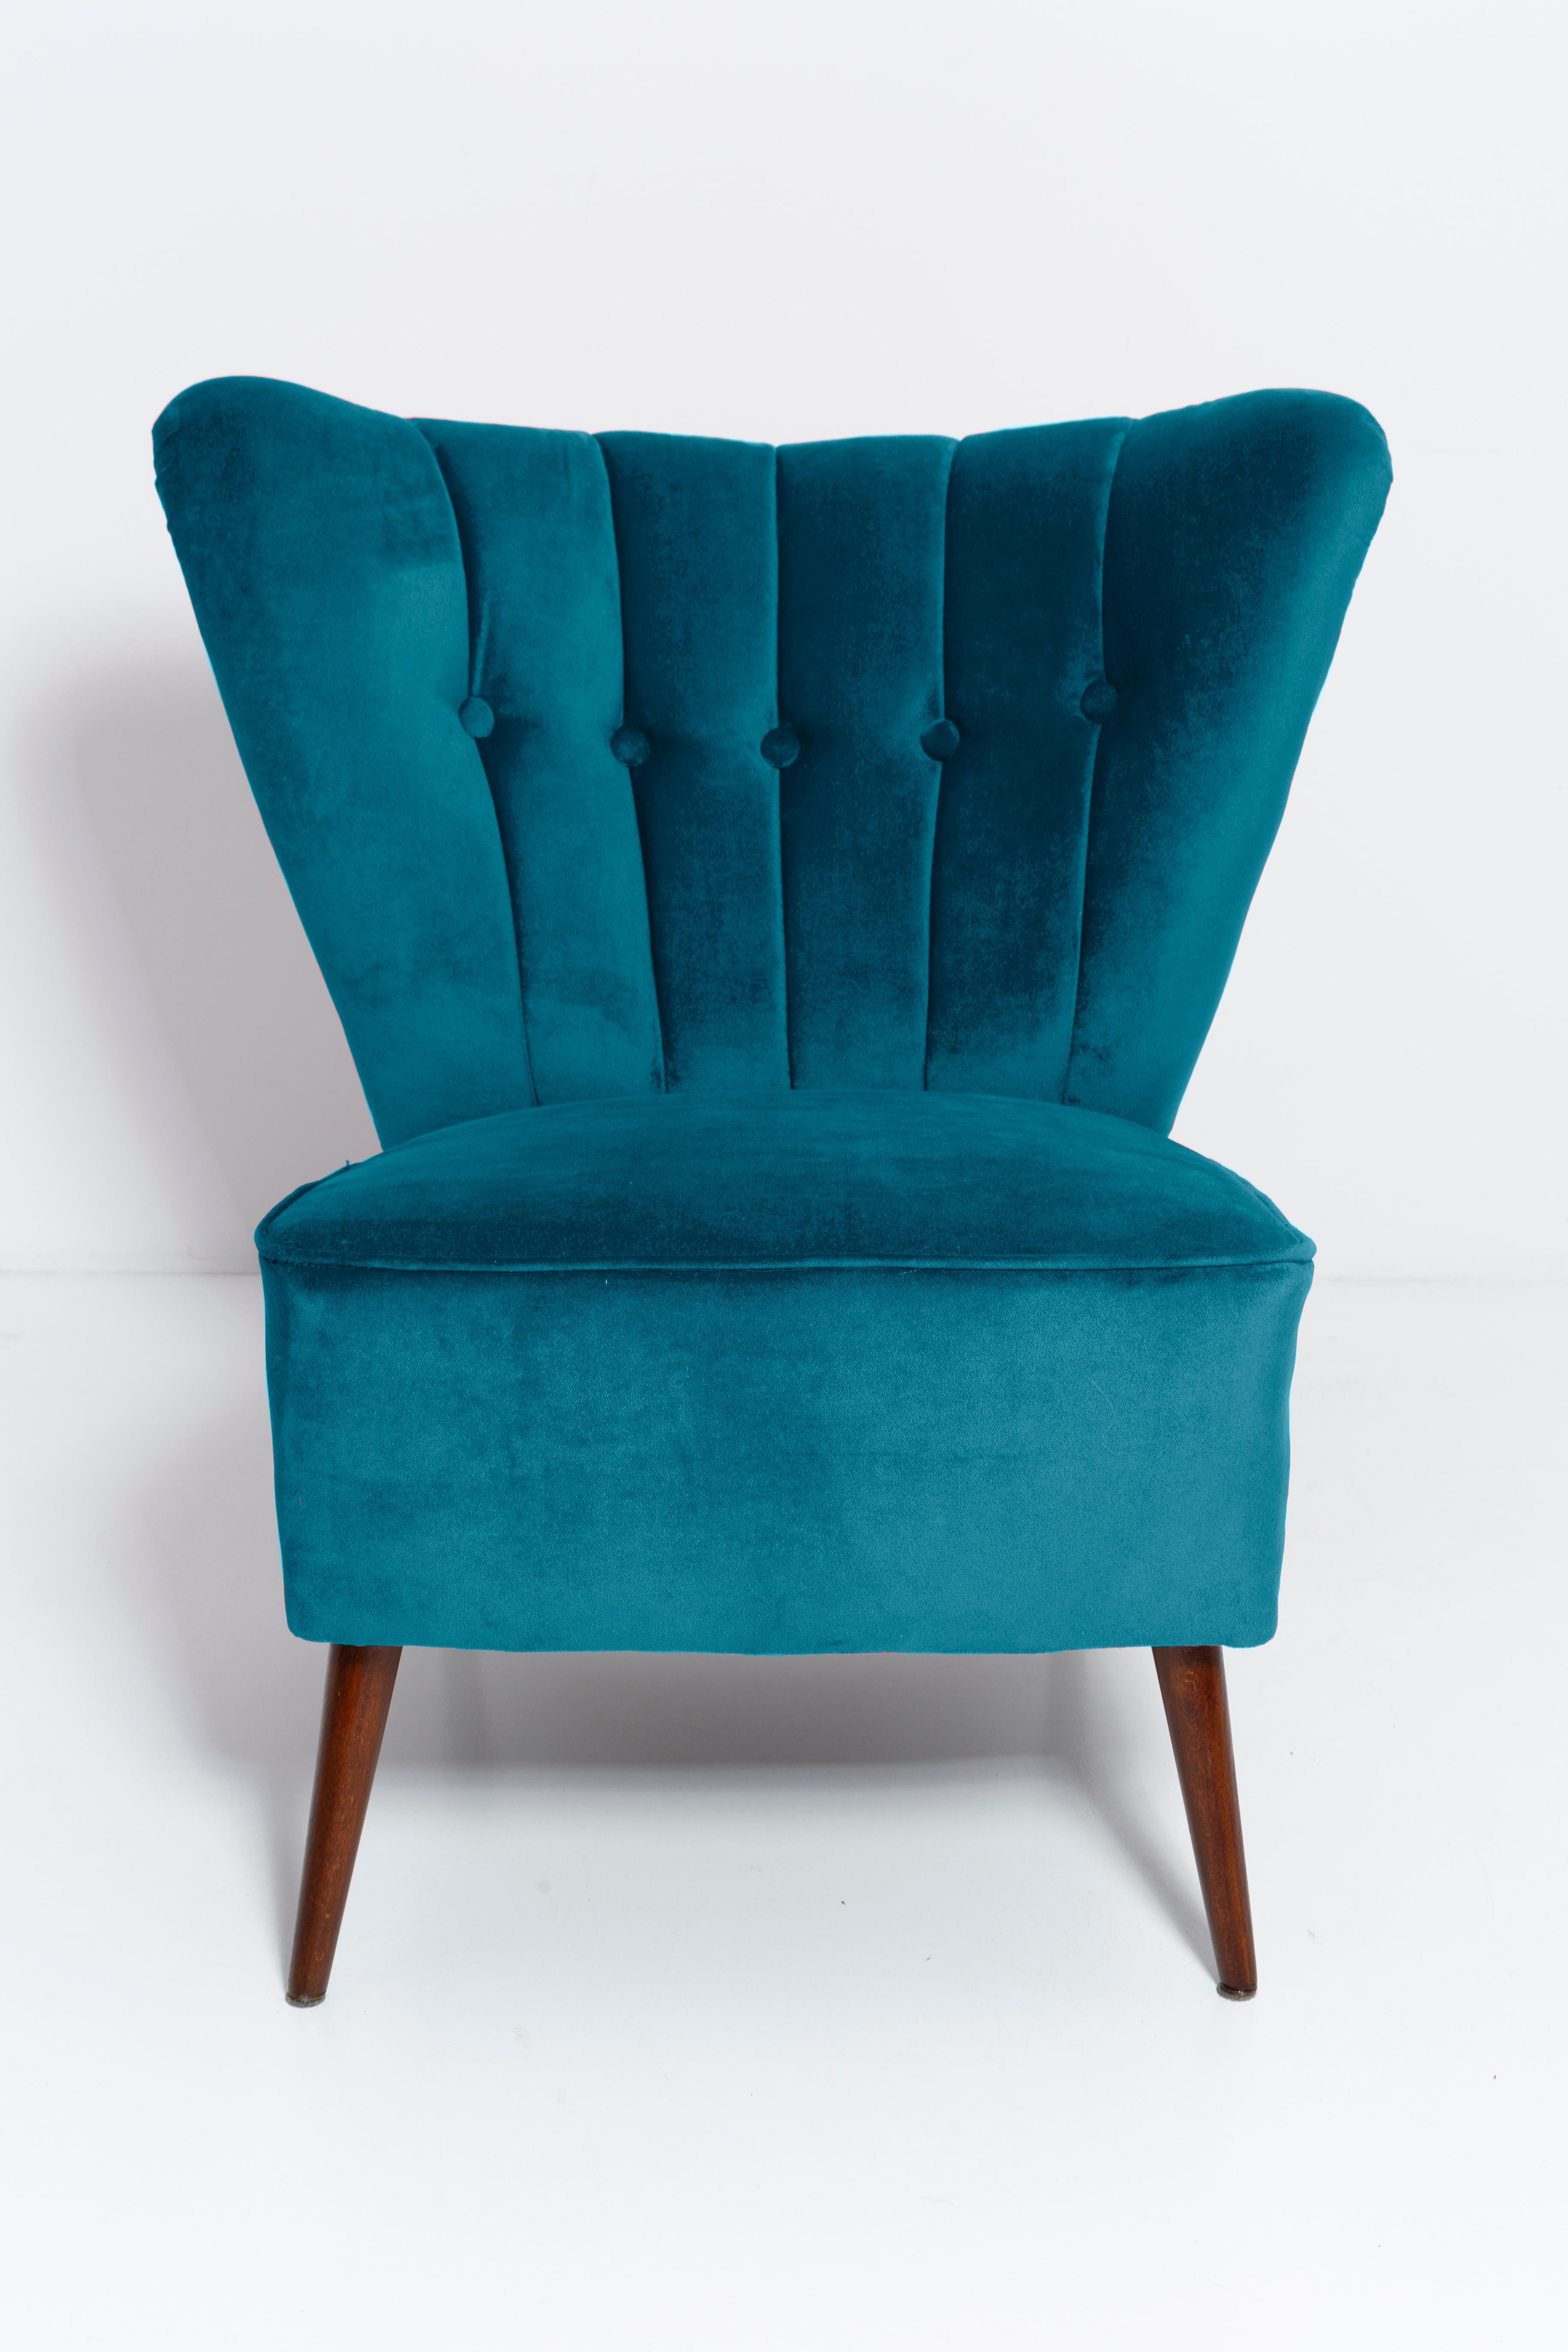 Set of Two Midcentury Petrol Blue Velvet Club Armchairs, Europe, 1960s For Sale 1